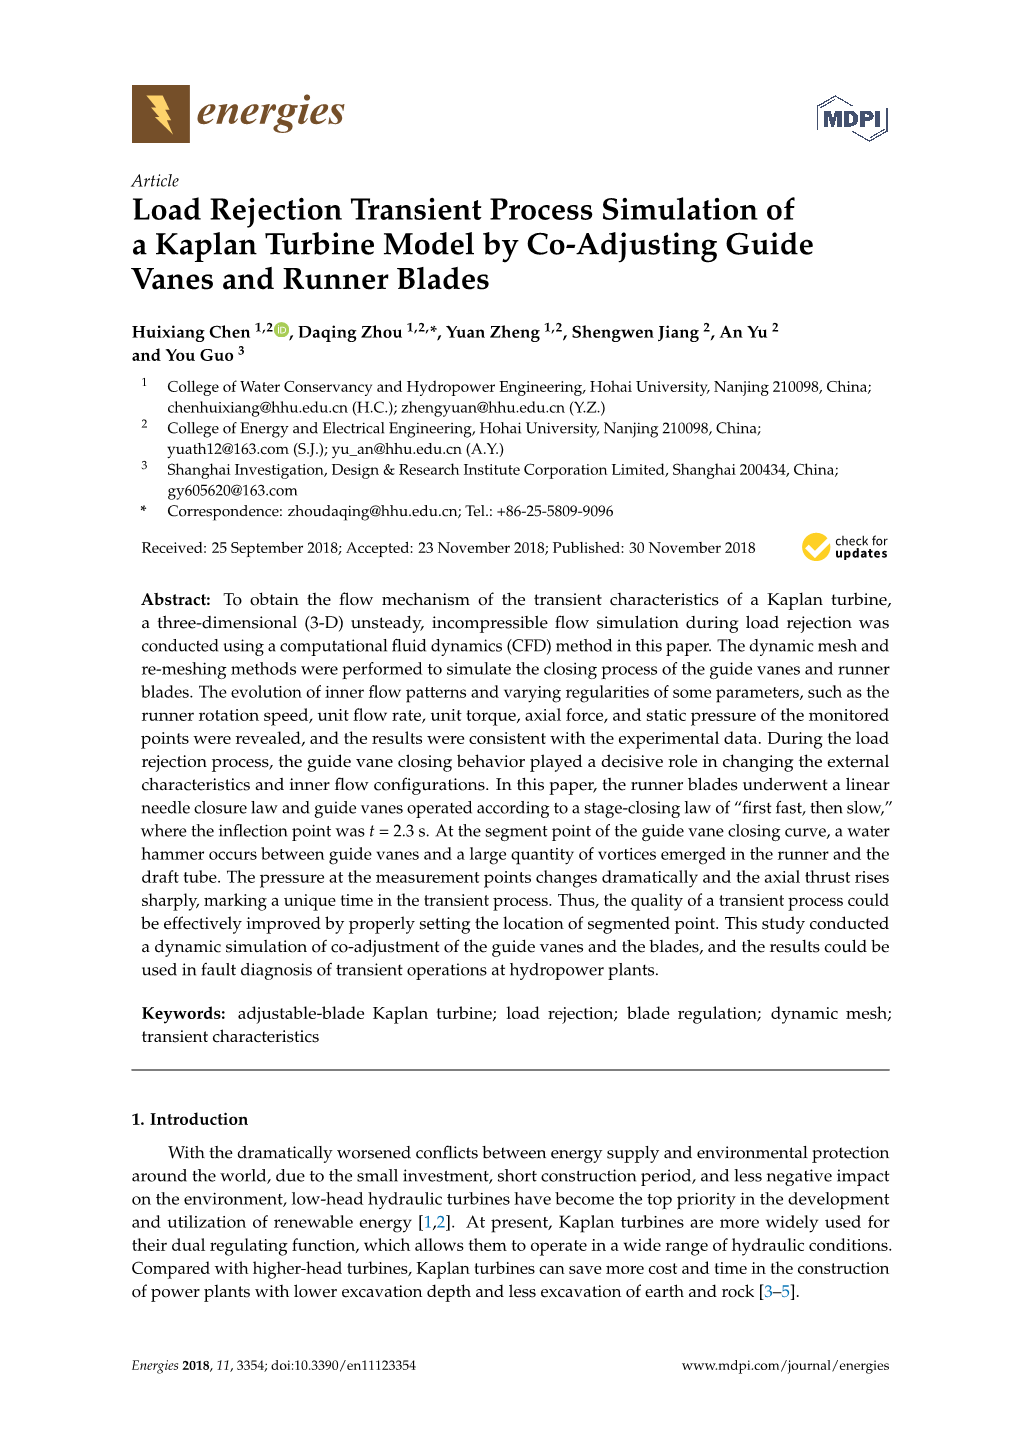 Load Rejection Transient Process Simulation of a Kaplan Turbine Model by Co-Adjusting Guide Vanes and Runner Blades